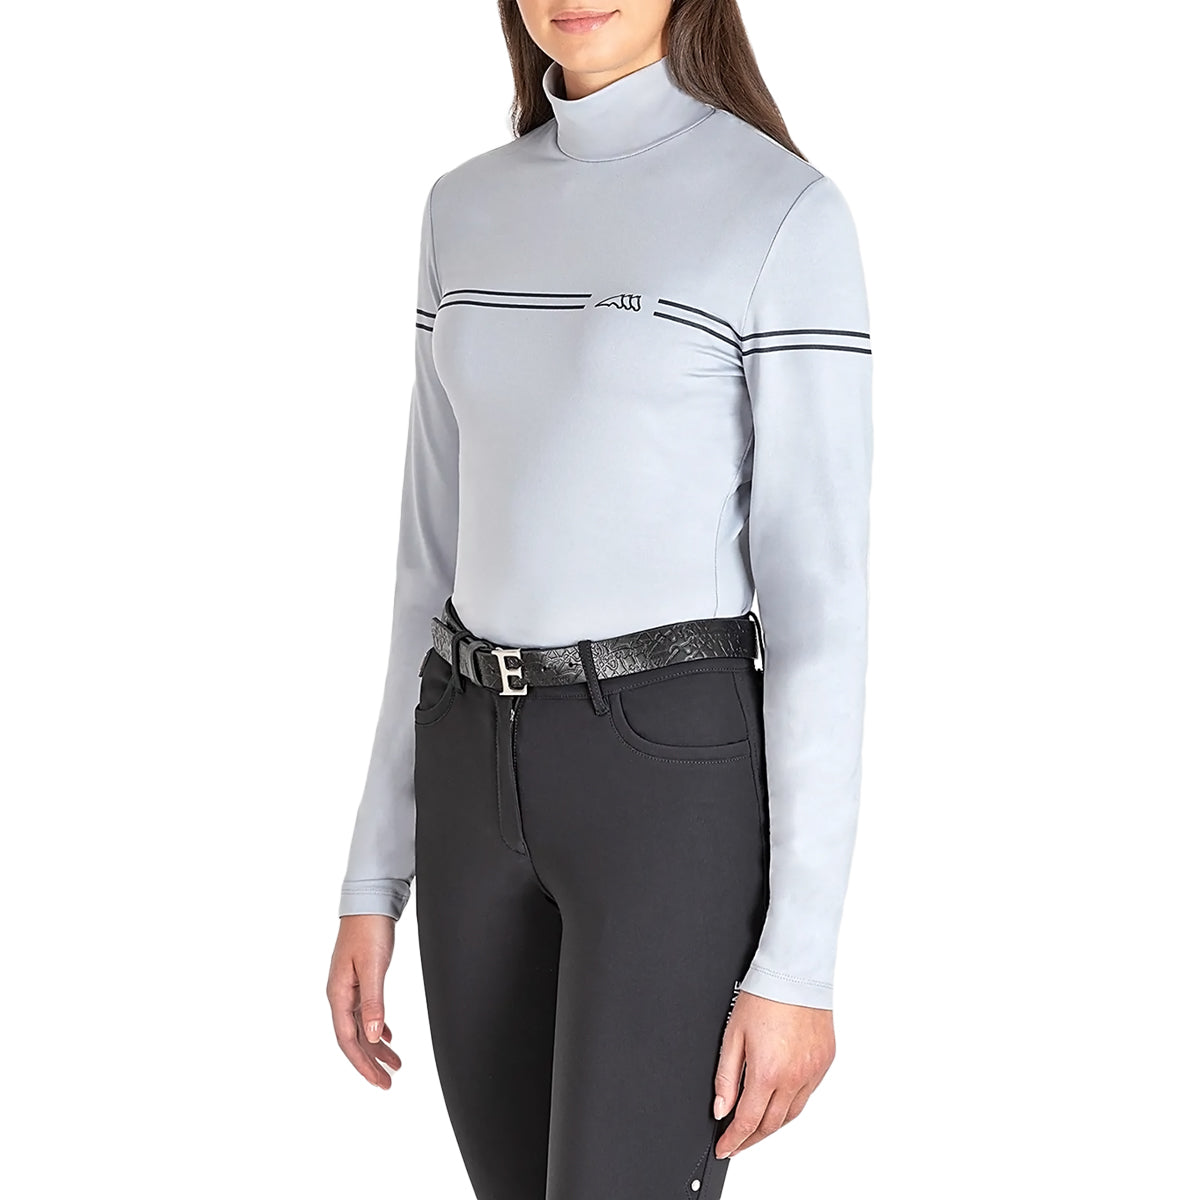 Equiline Women's Eoije Second Skin Training Baselayer